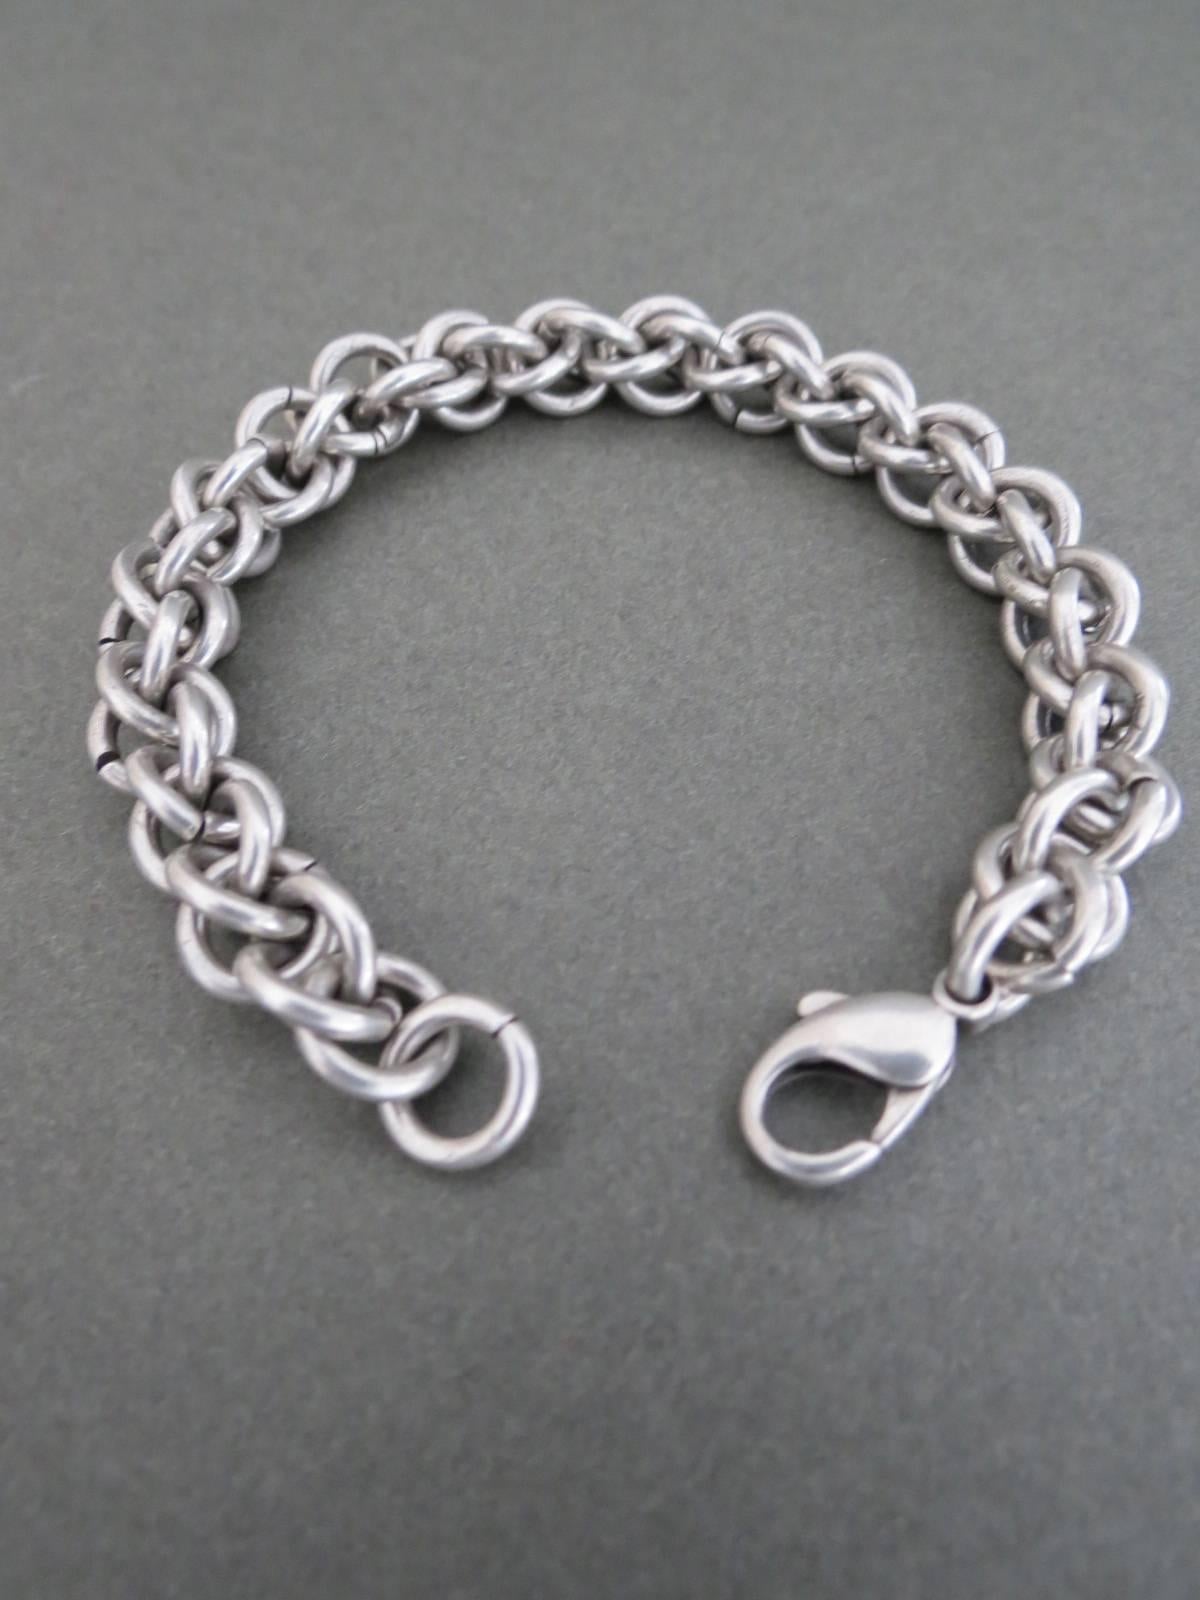 Vintage Mid Century Danish Silver Link Chain Bracelet  In Good Condition For Sale In Hove, GB